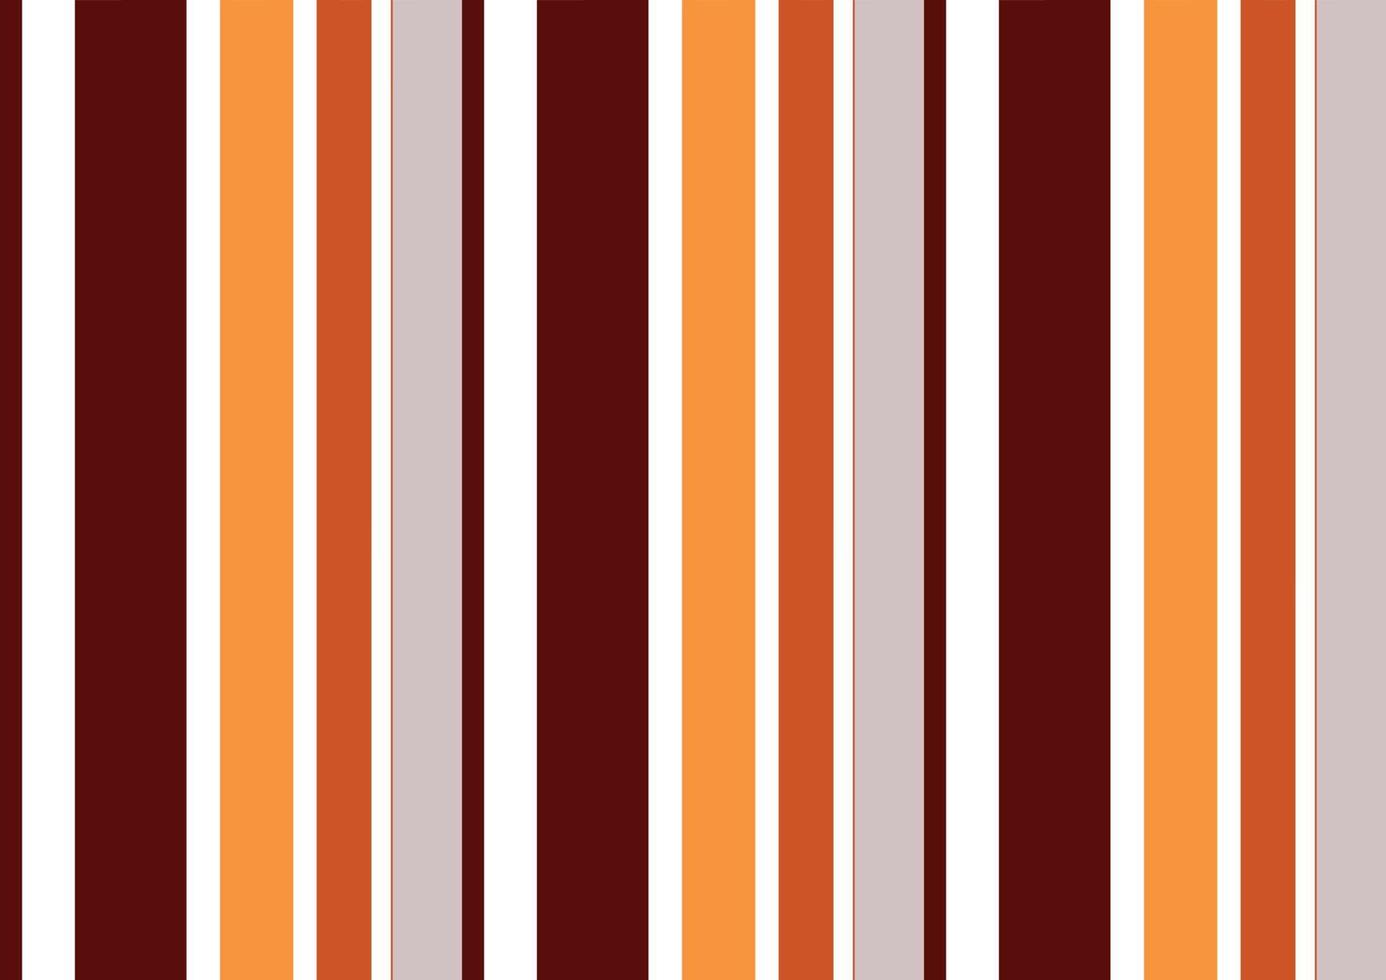 Barcode Seamless pattern striped fabric prints Vertical stripes of plain coloured satin alternate with contrasting narrow embroidered bands in the manner of the costume vector